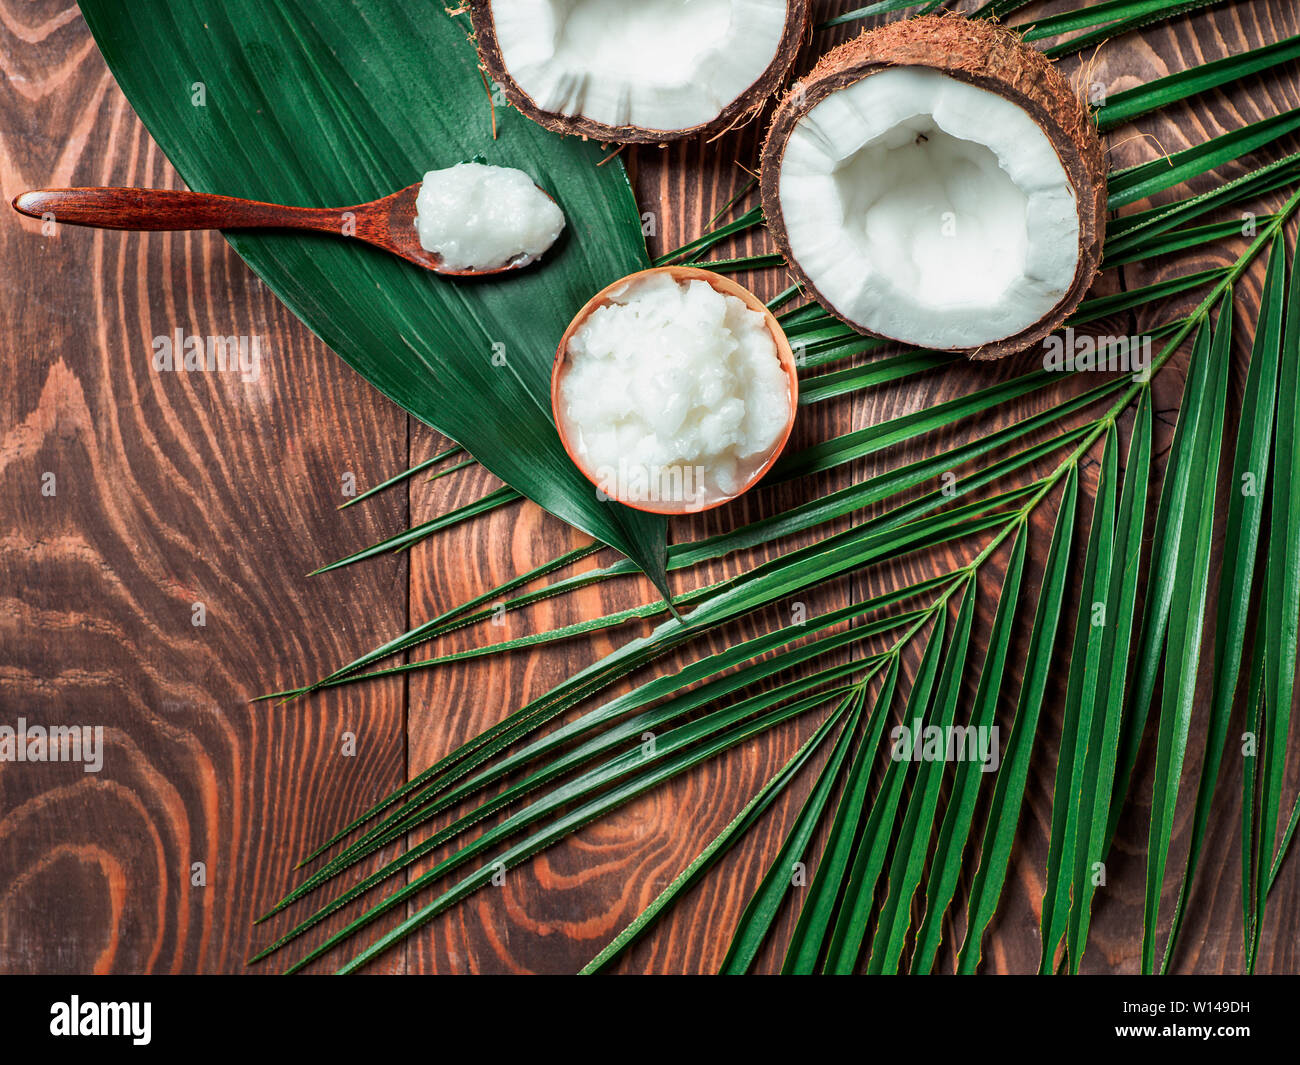 Top view of coconut MCT oil in bowl and in spoon and halved coco-nut on wooden table. Health Benefits of MCT Oil. MCT or medium-chain triglycerides, form of saturated fatty acid. Flat lay. Copy space Stock Photo